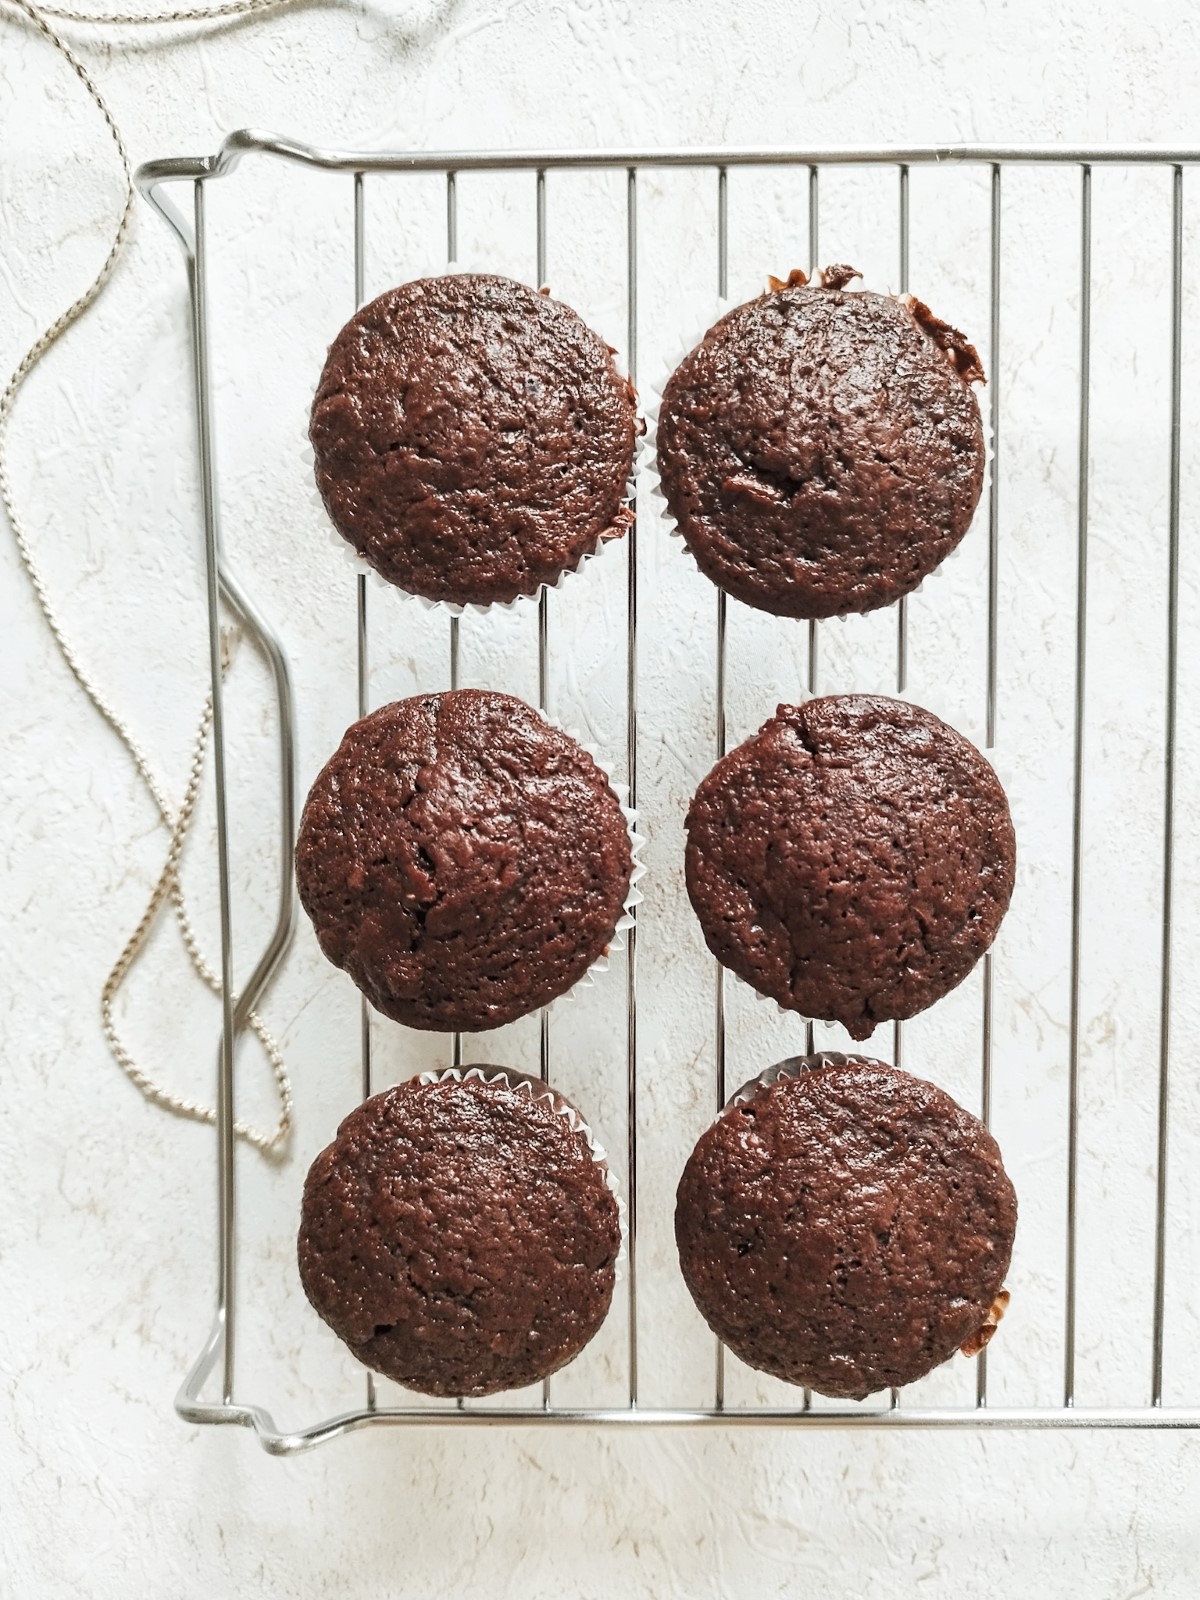 Zucchini Muffins with Chocolate - Title of the Recipe